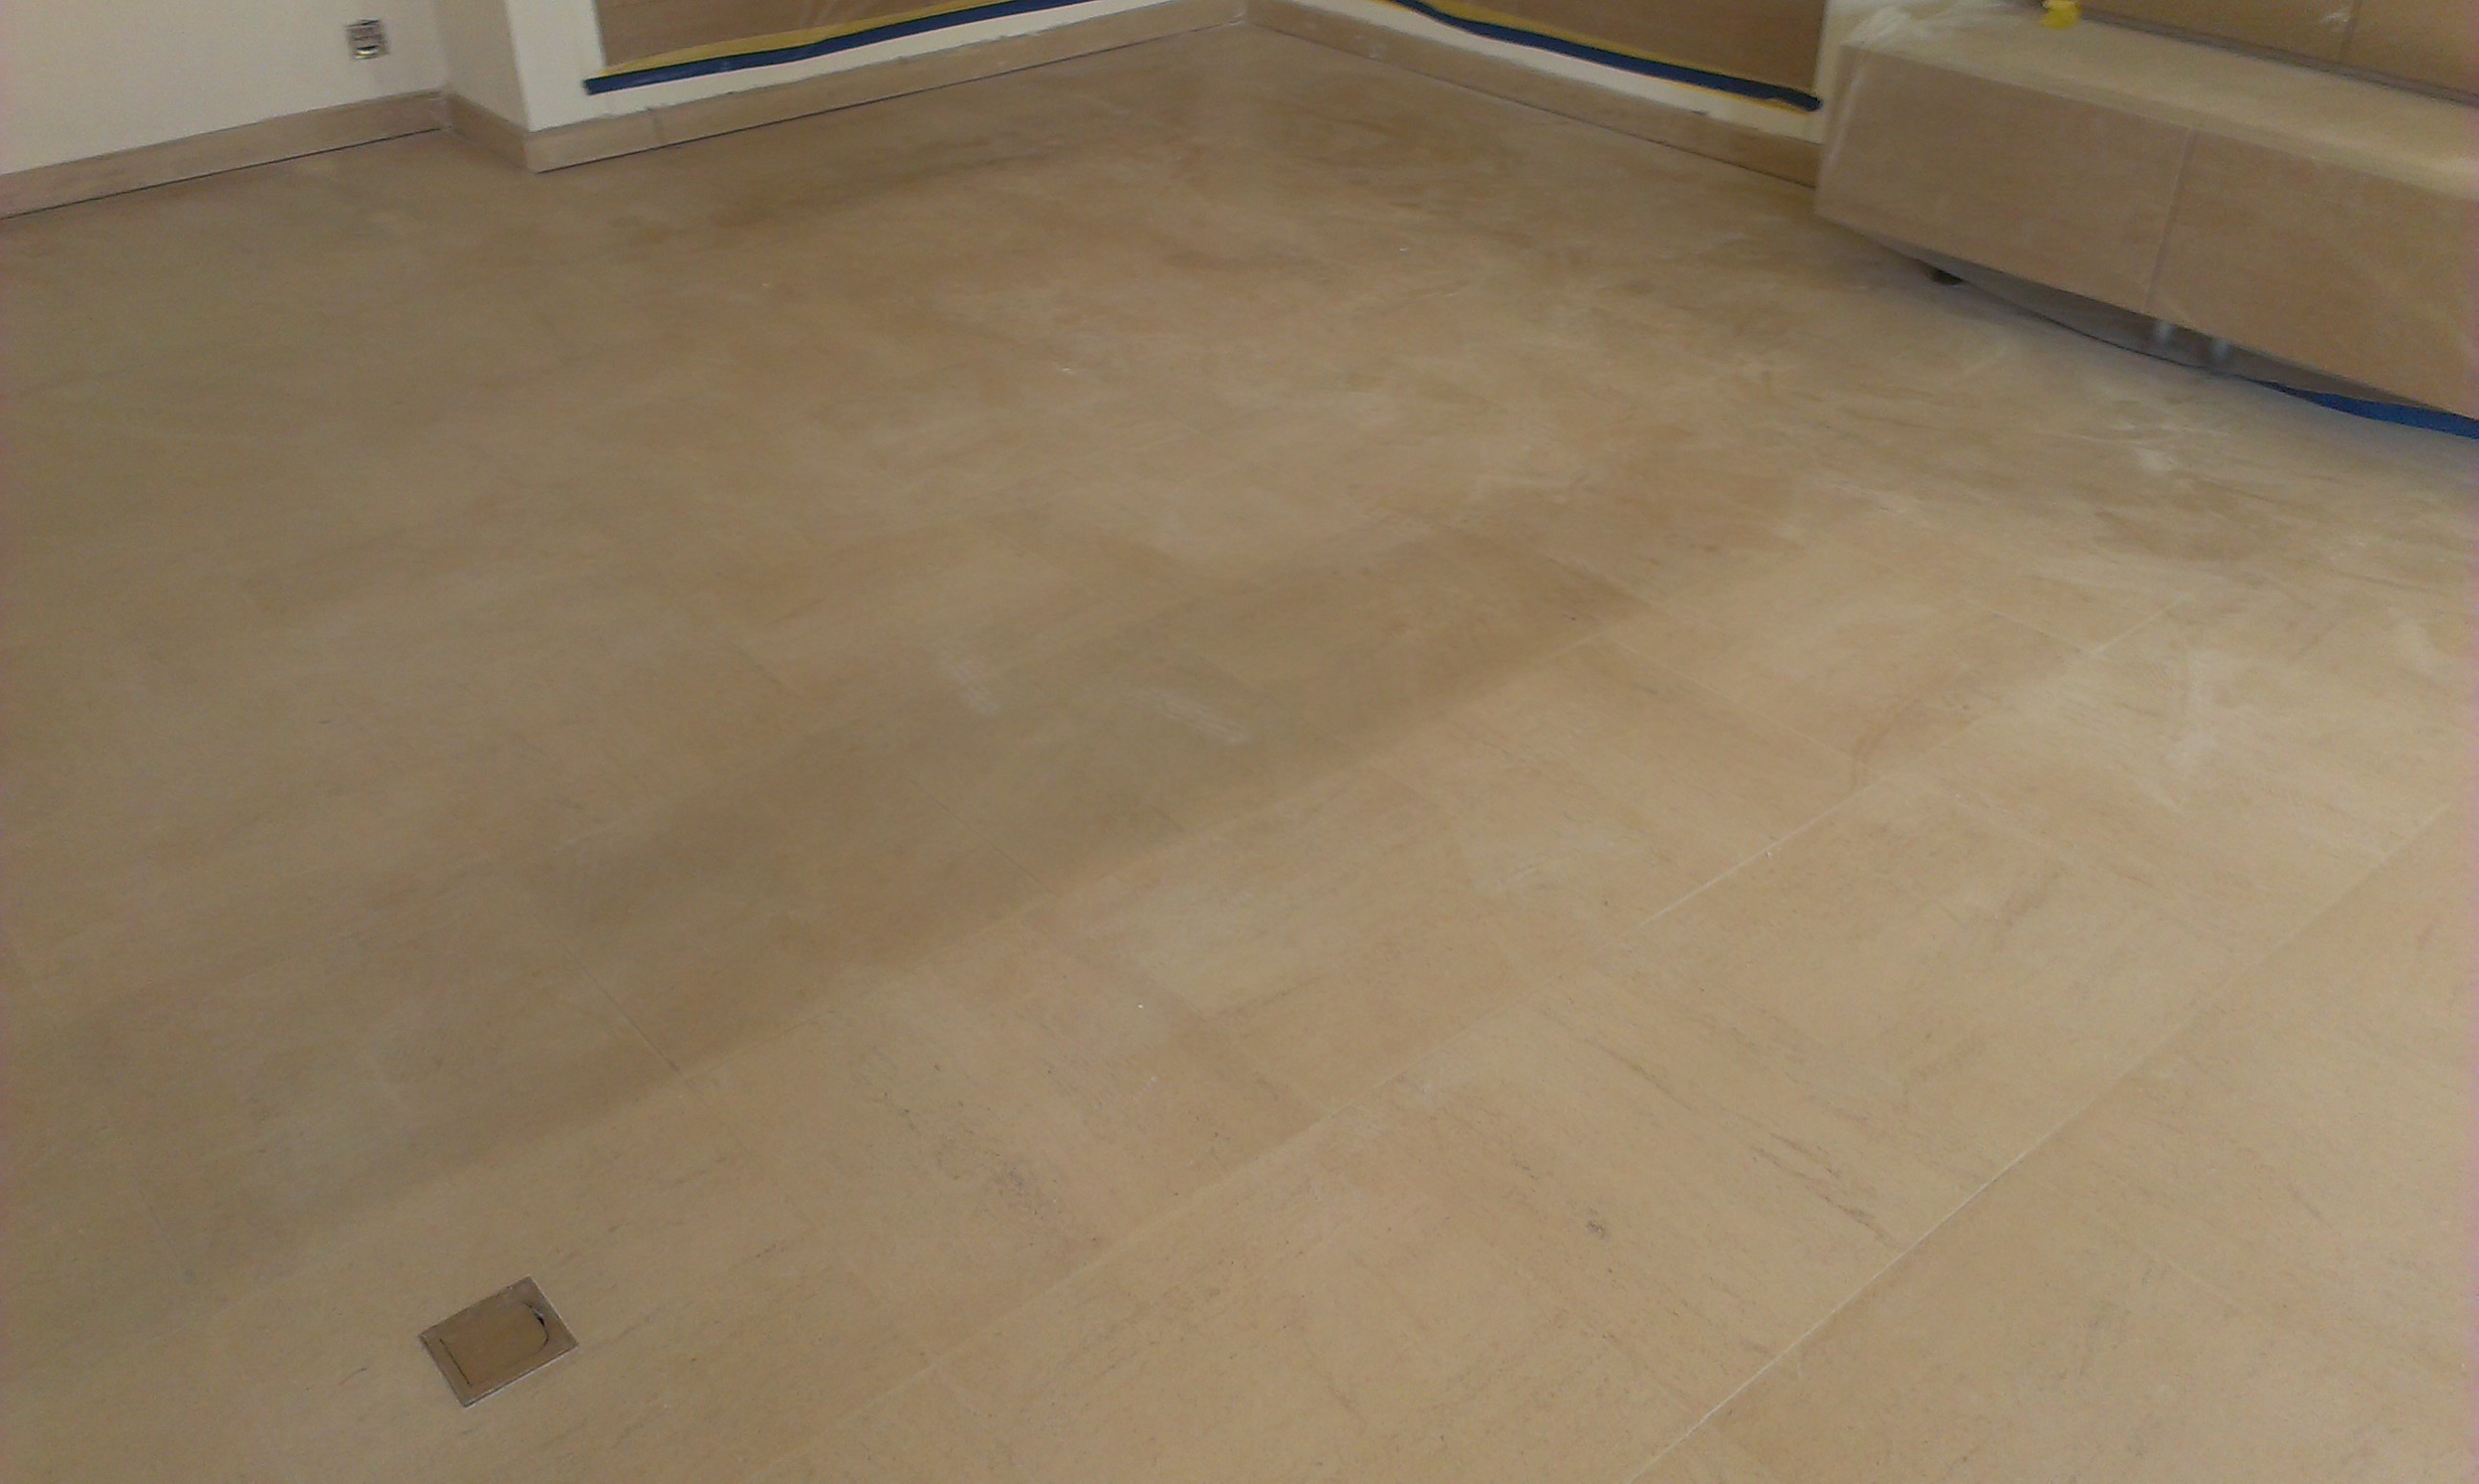 The natural stone floor after removing the carpeting and before cleaning and sealing